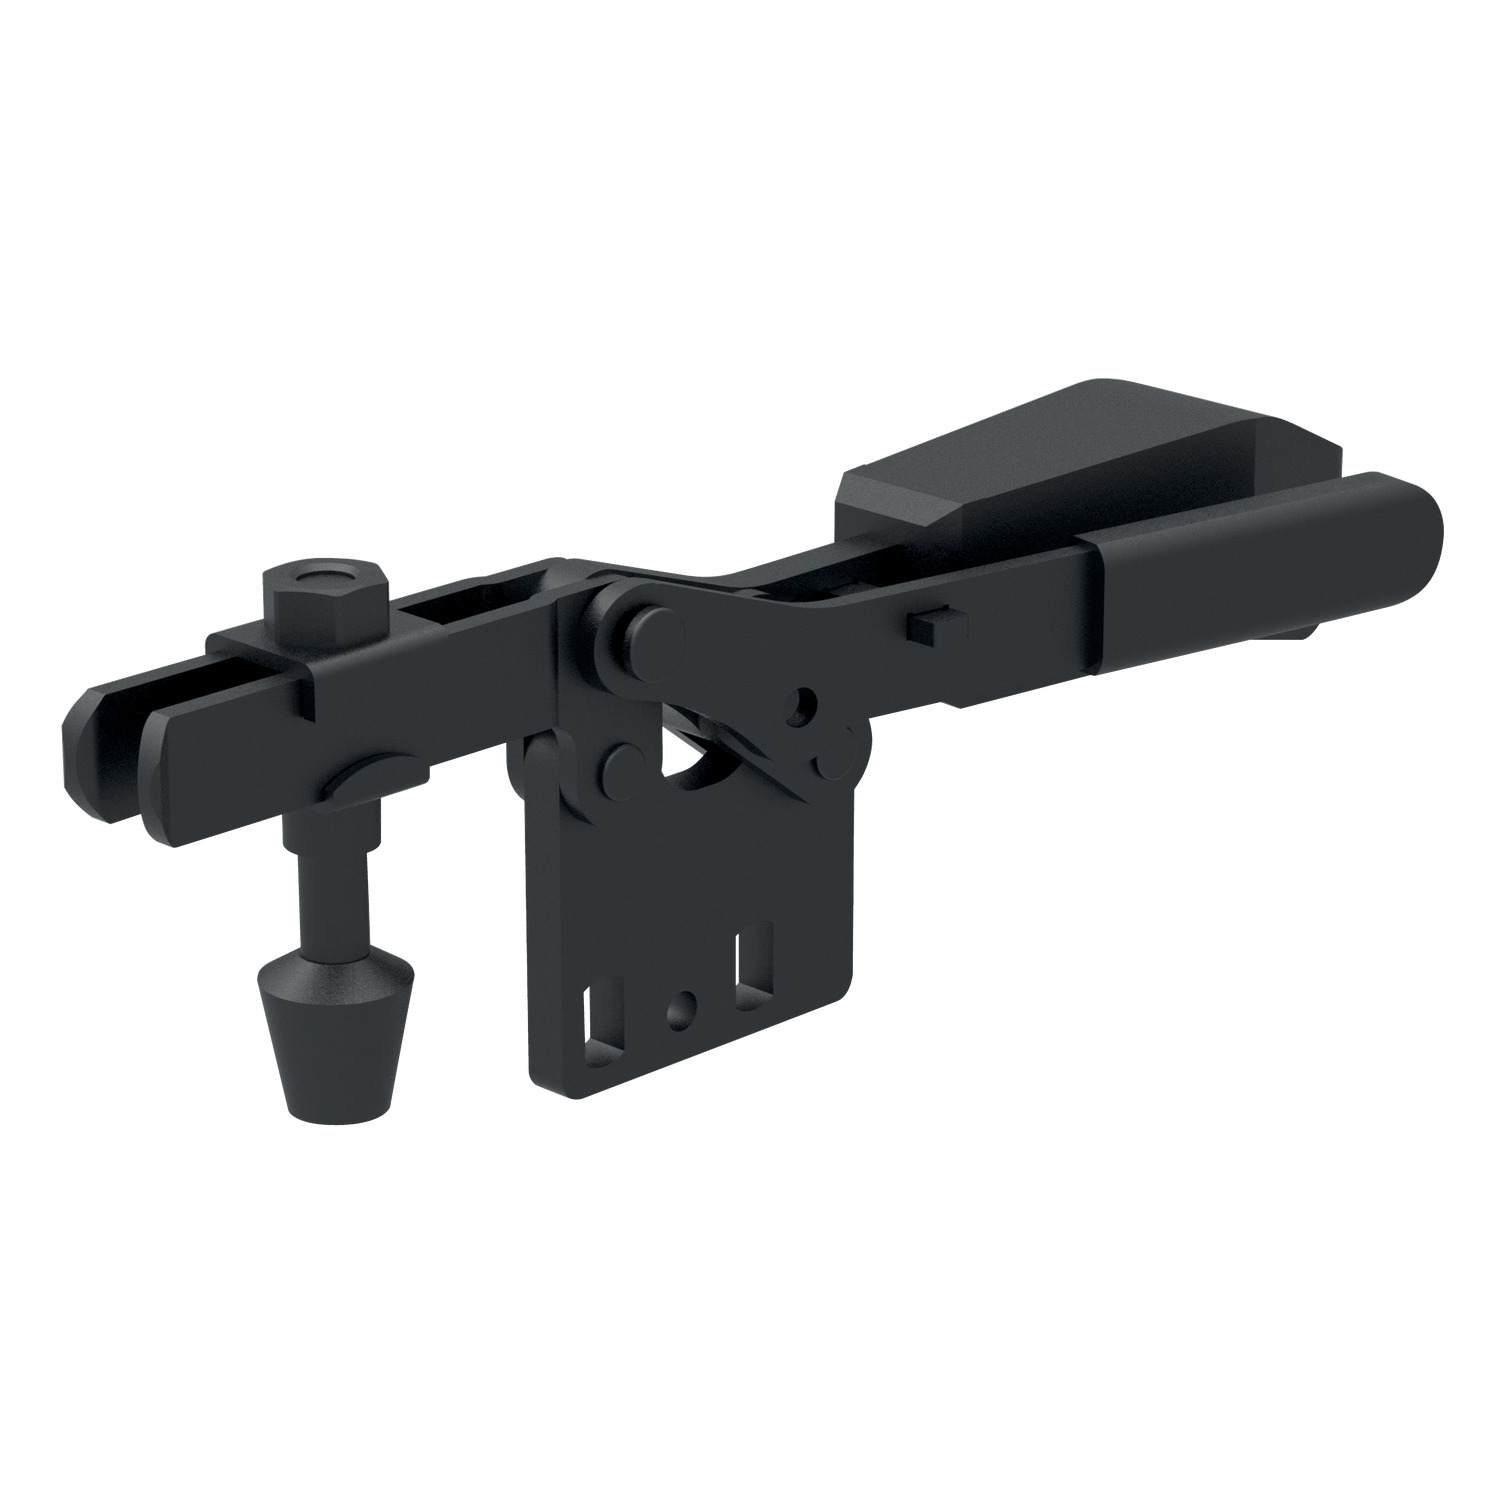 Product 41060.2, Horizontal Acting Toggle Clamps black - open arm - vertical base - safety / 